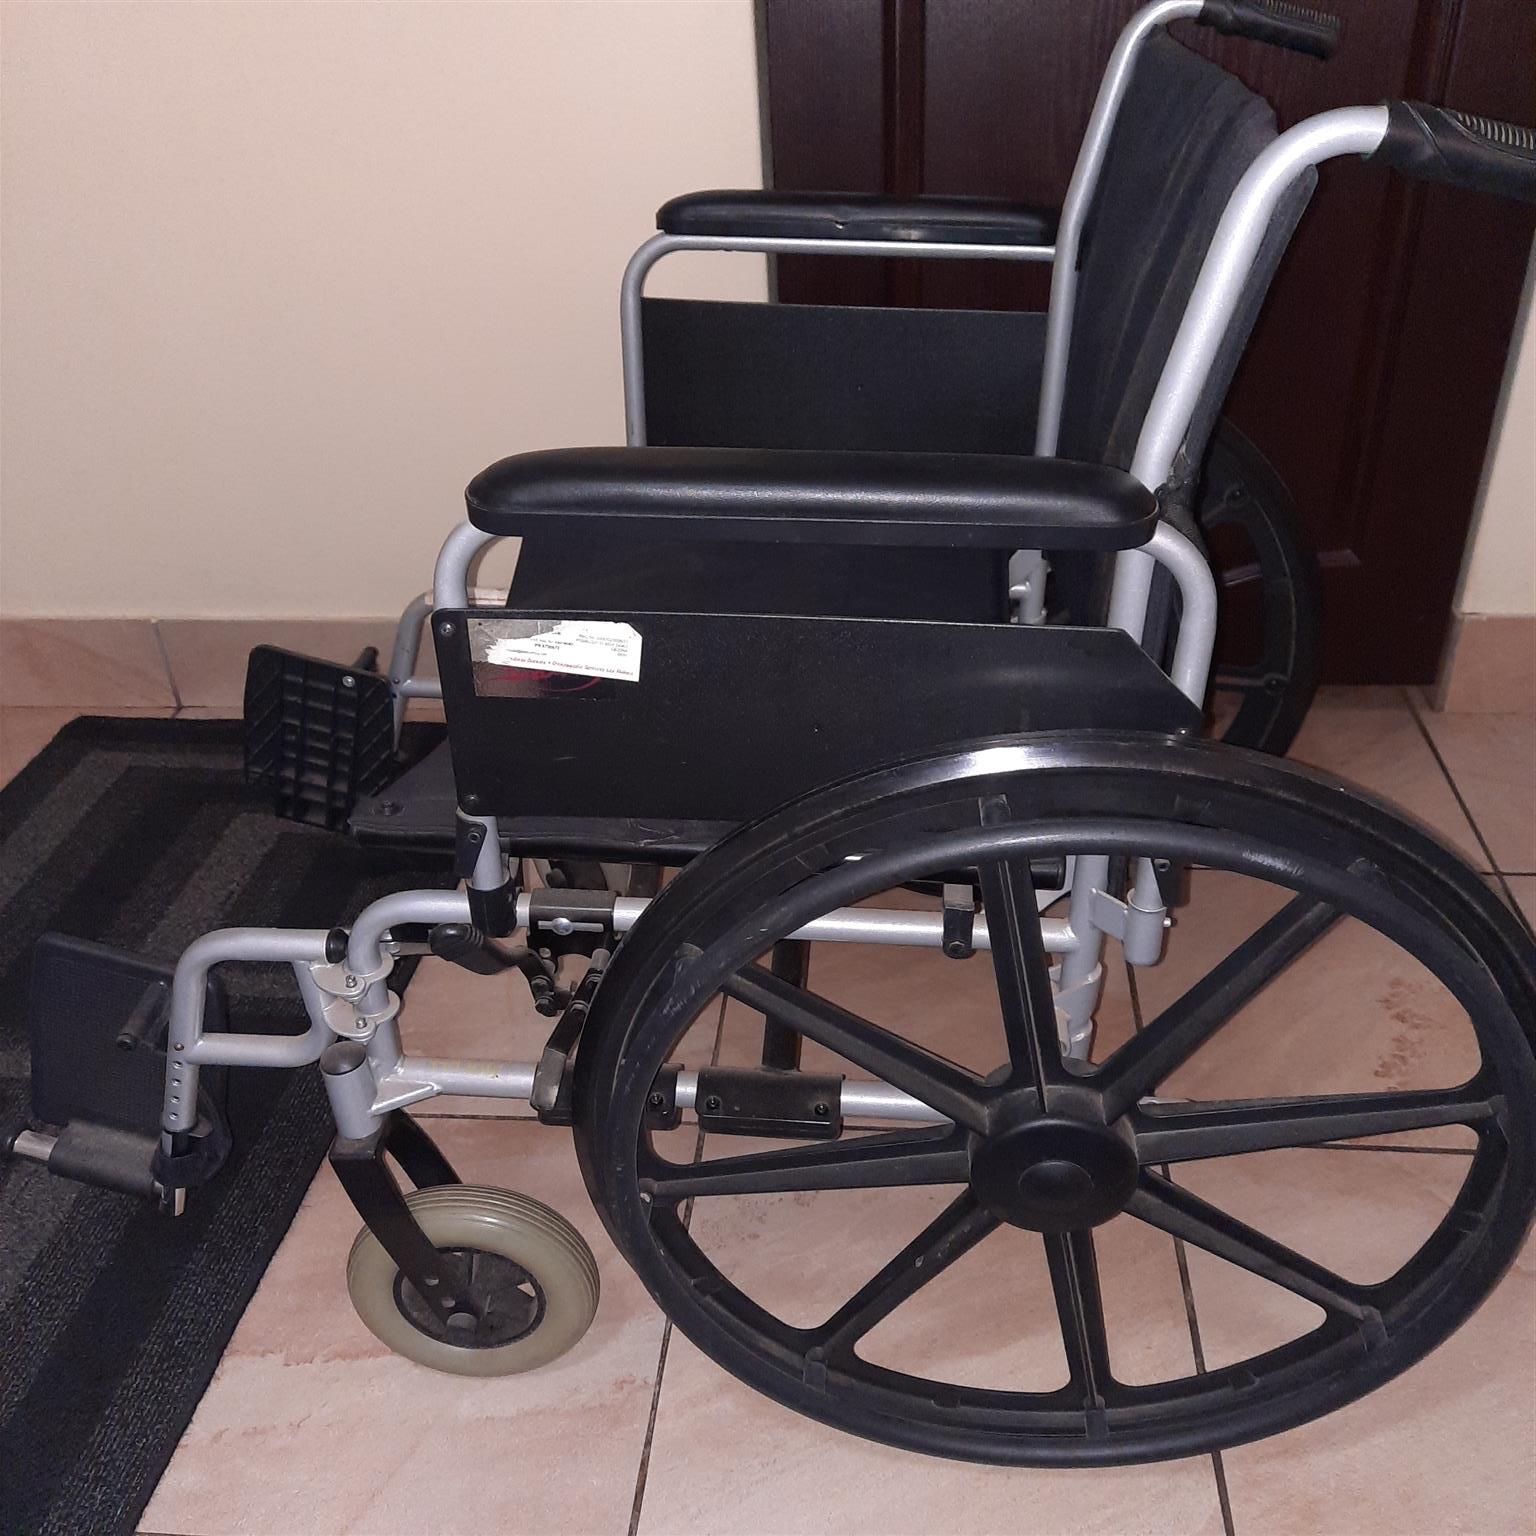 Wheel chair extra heavy duty (150kg max). Used three times. Still in mint condit